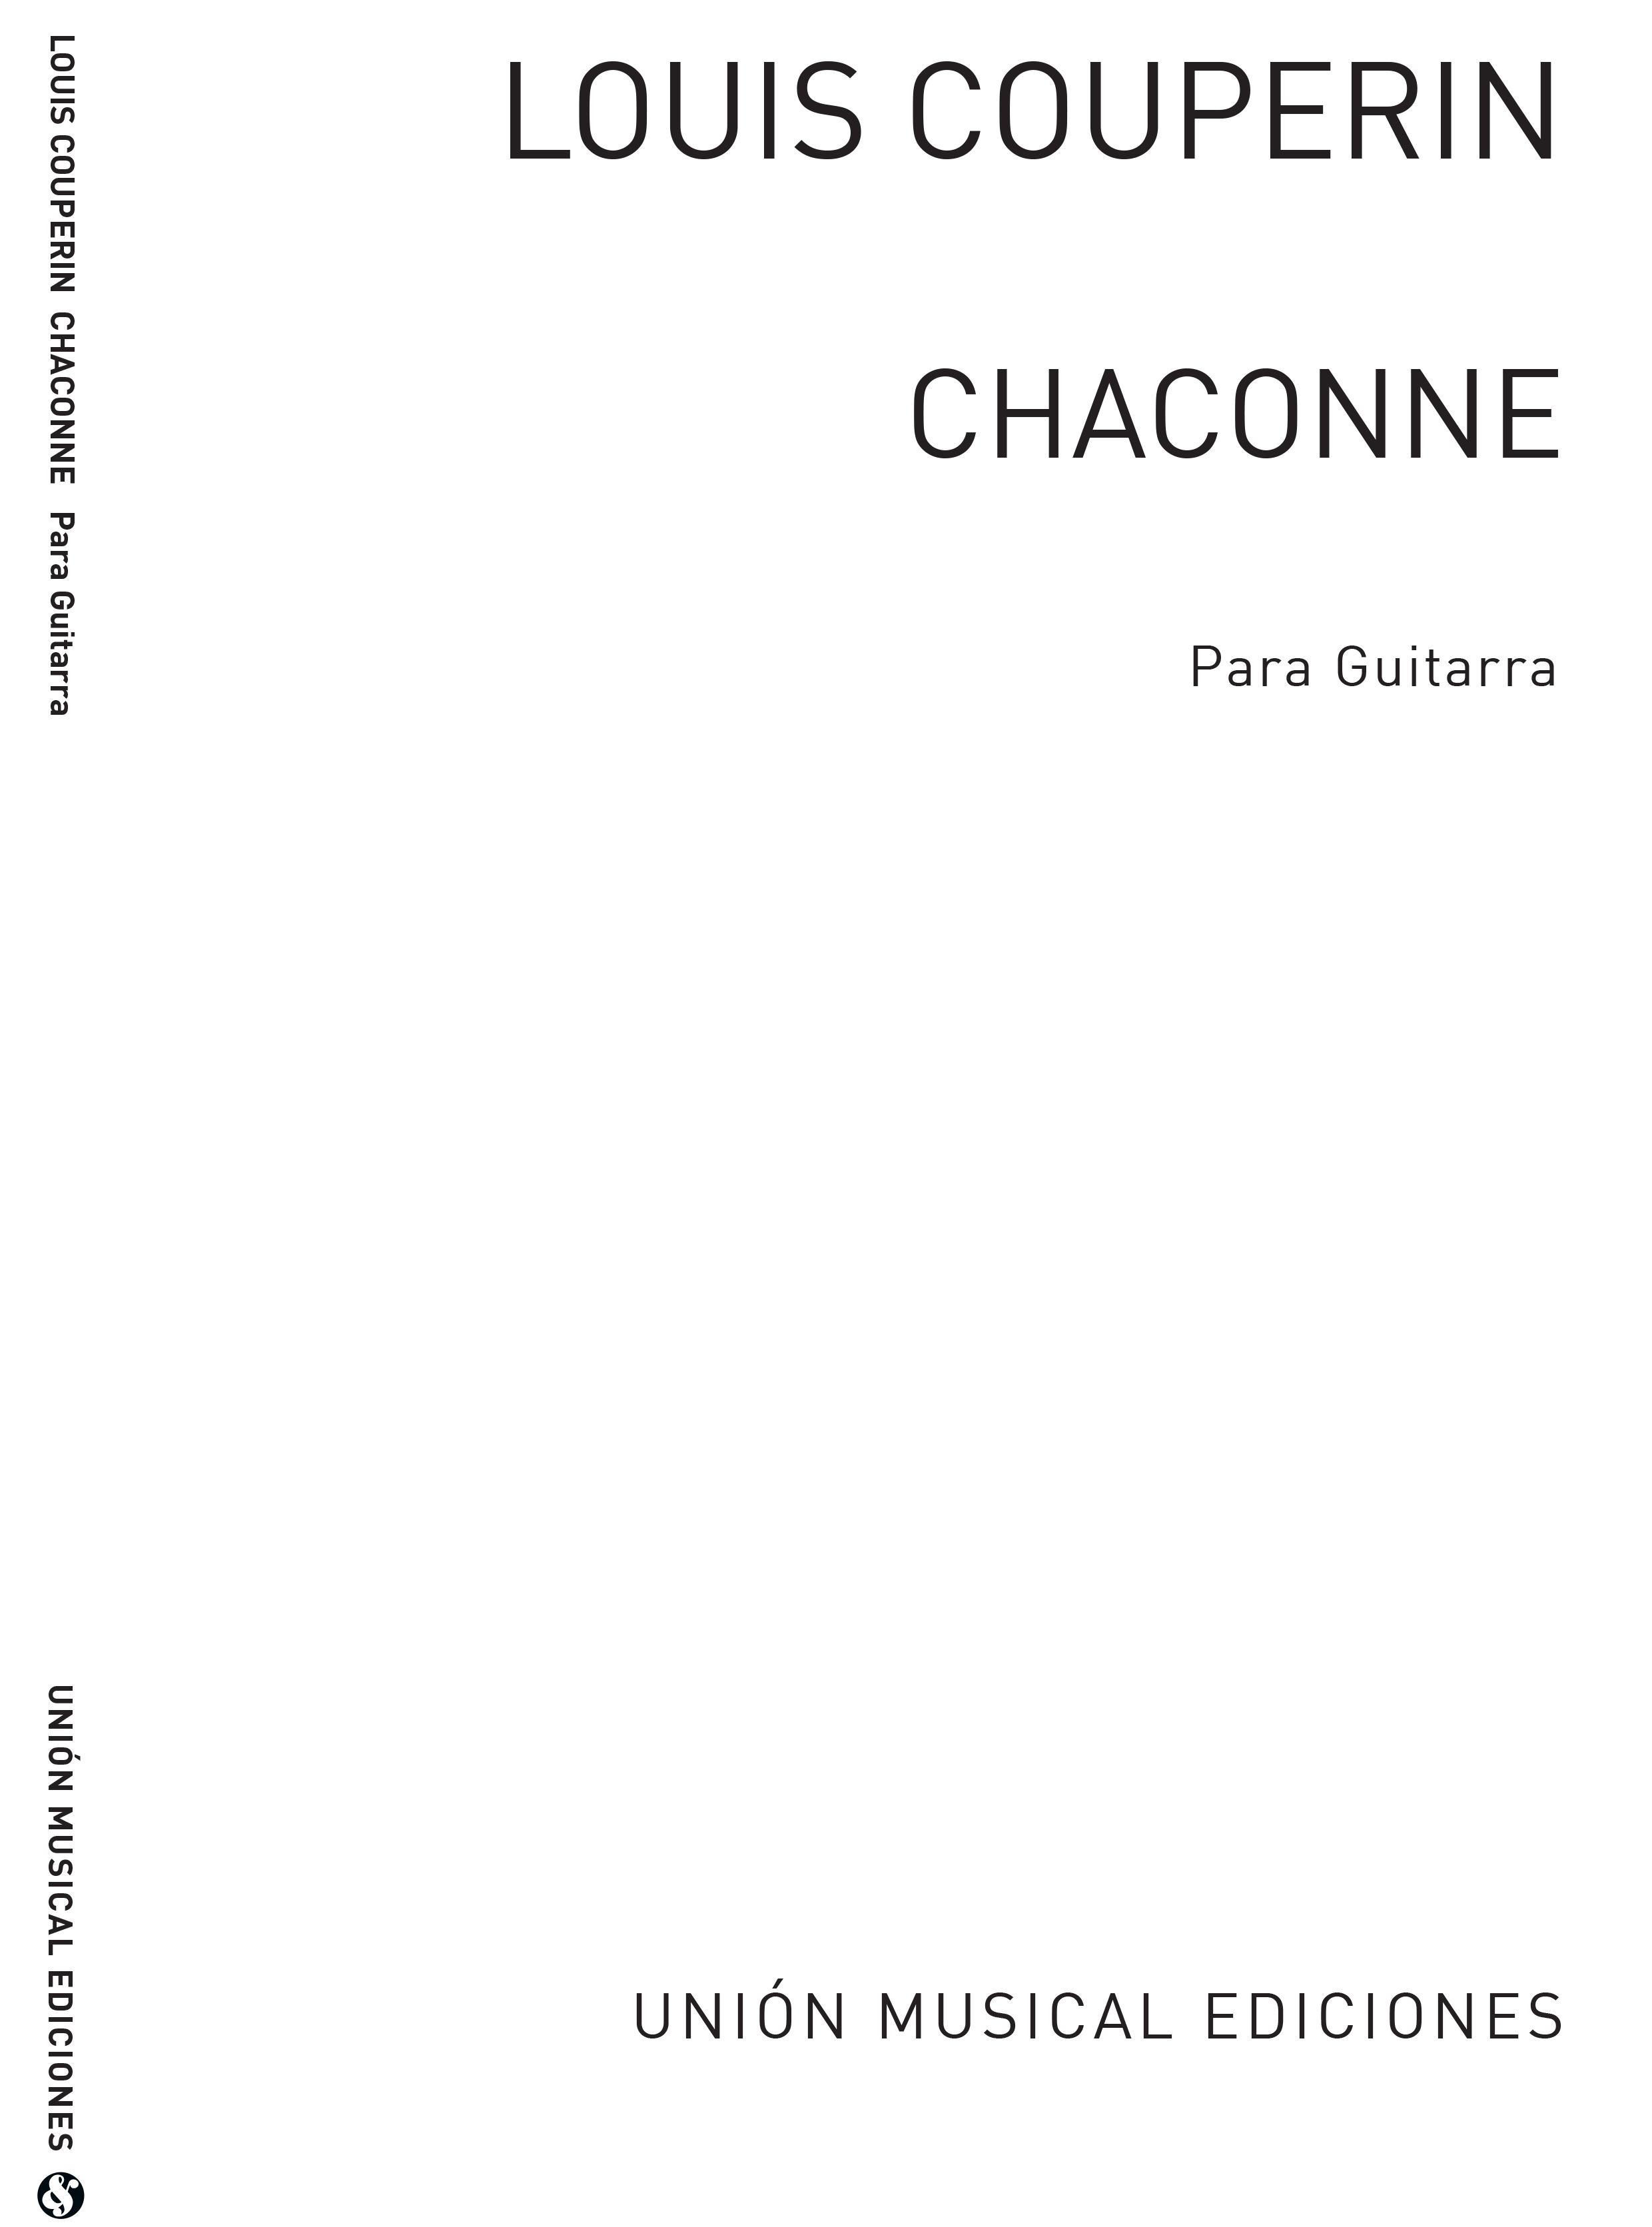 I. Couperin: Chaconne: Guitar: Instrumental Work